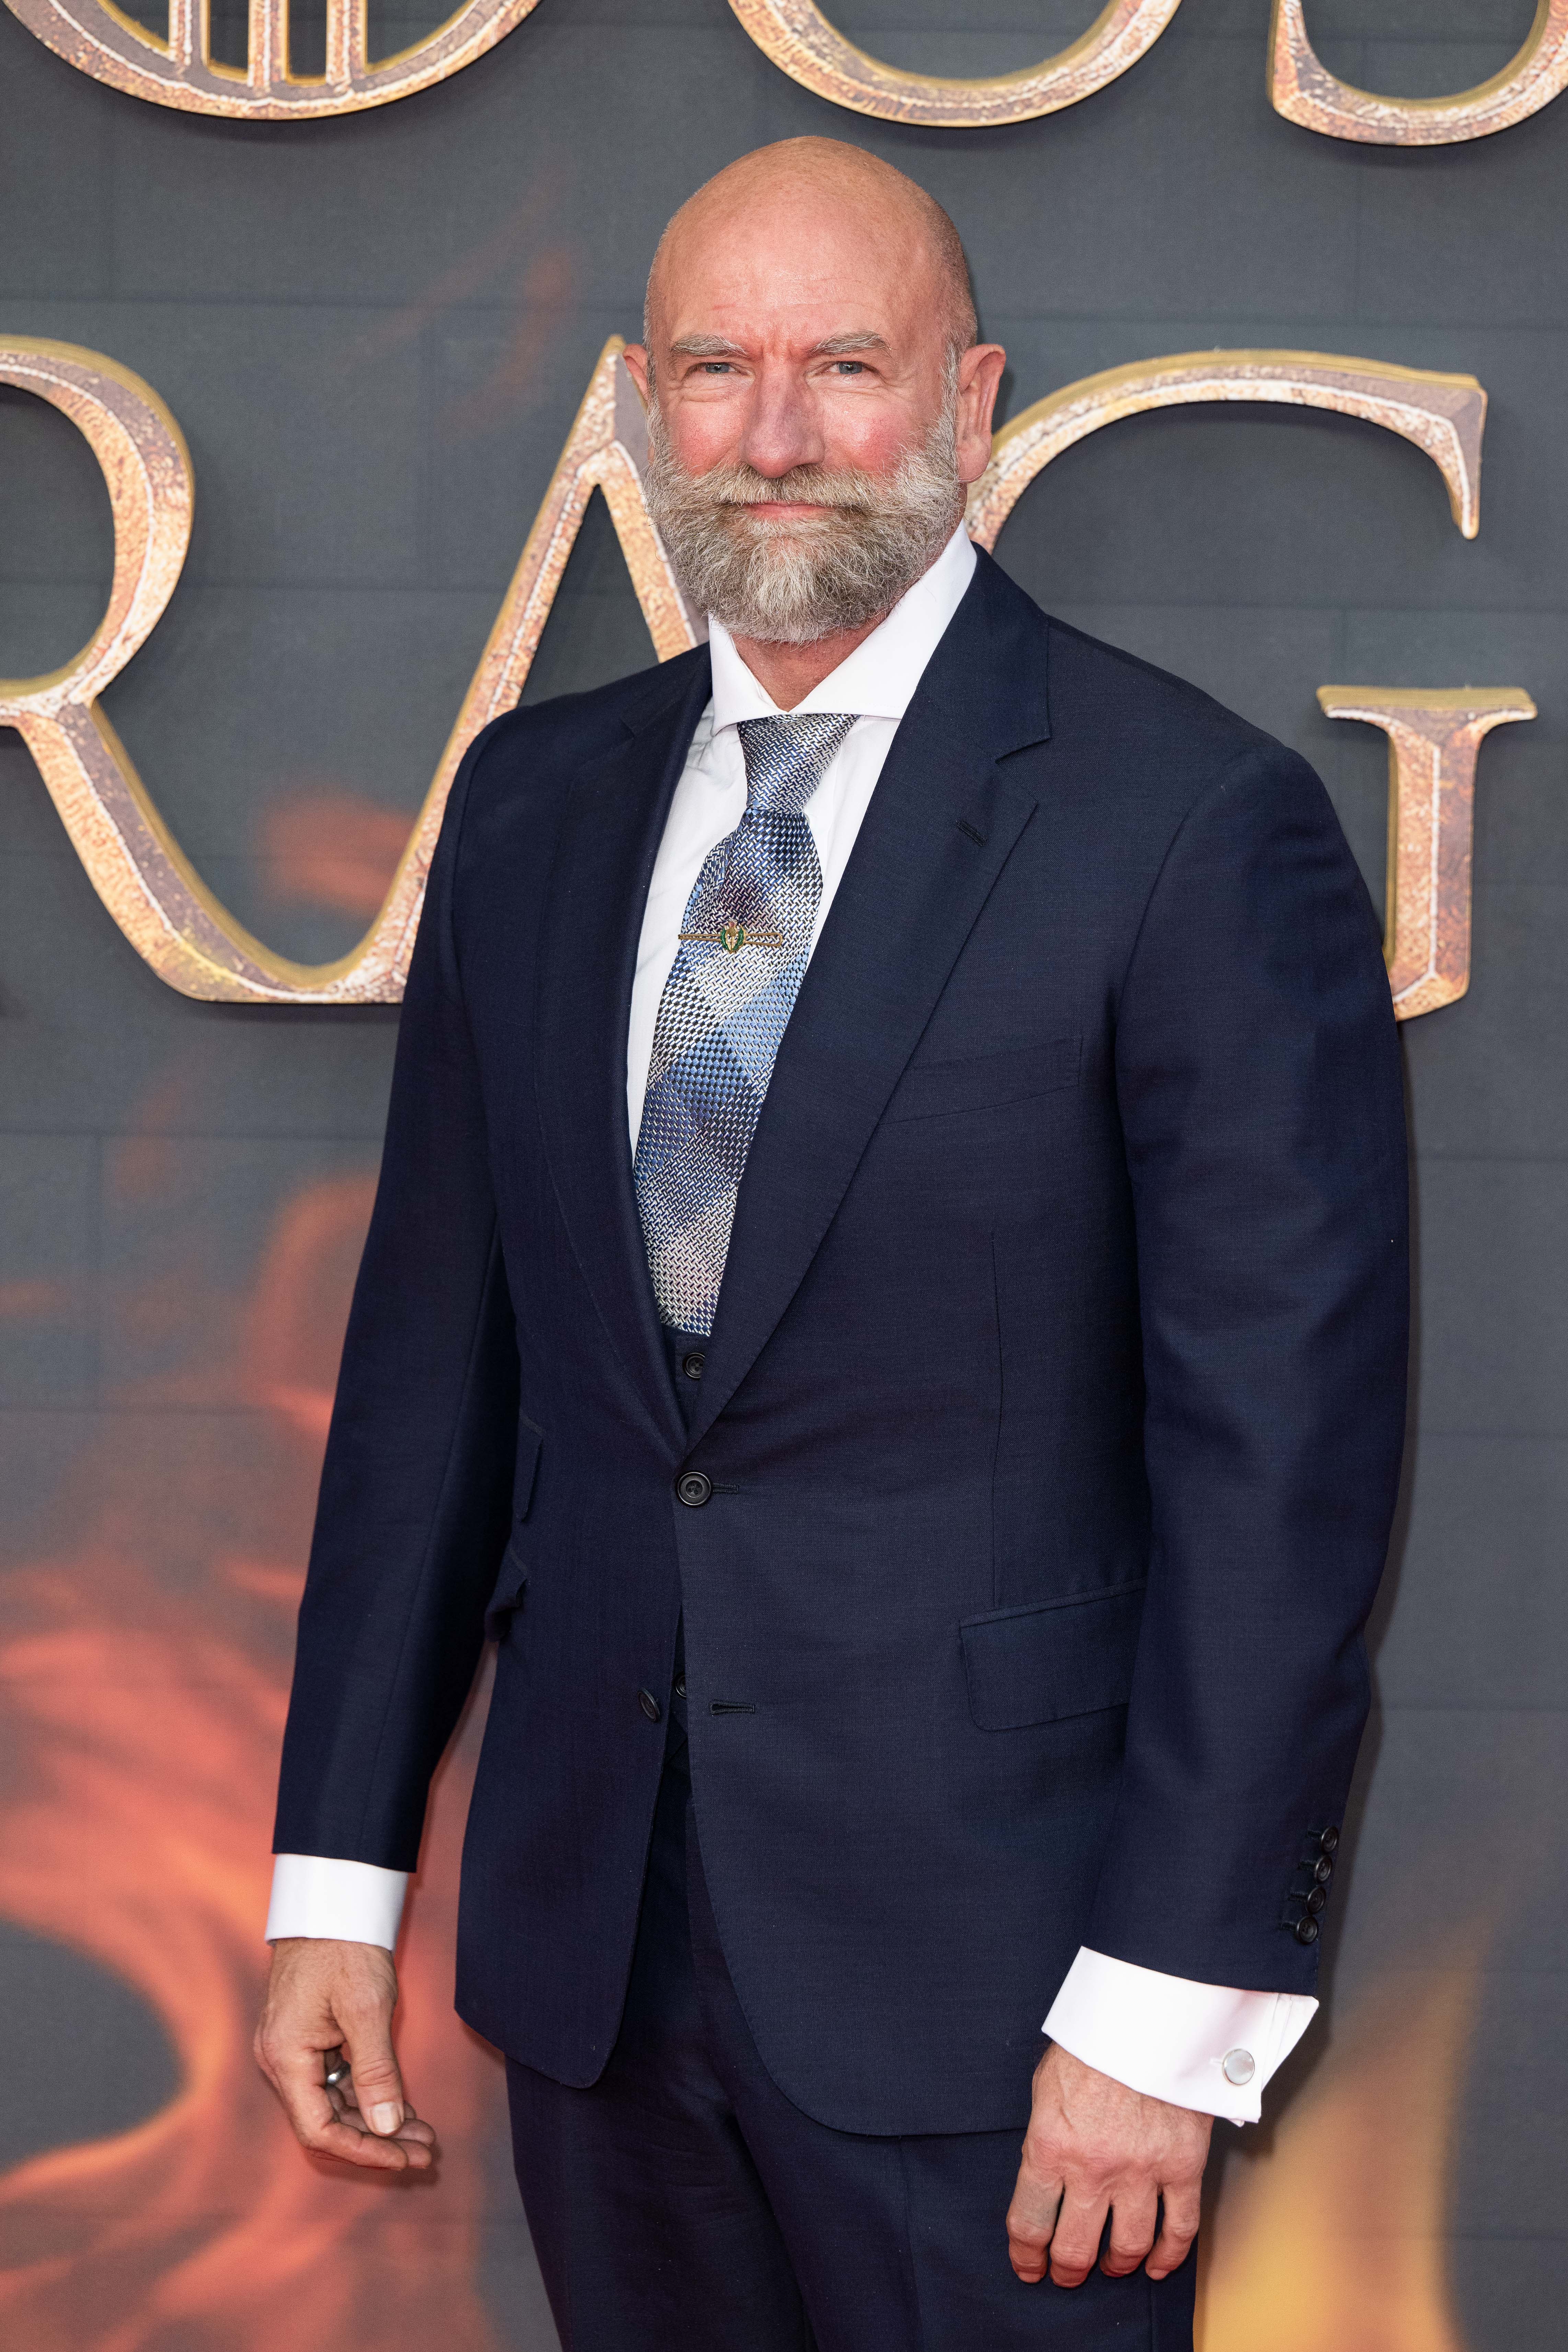 Graham McTavish at the London premiere of "House of the Dragon" on August 15, 2022 | Source: Getty Images